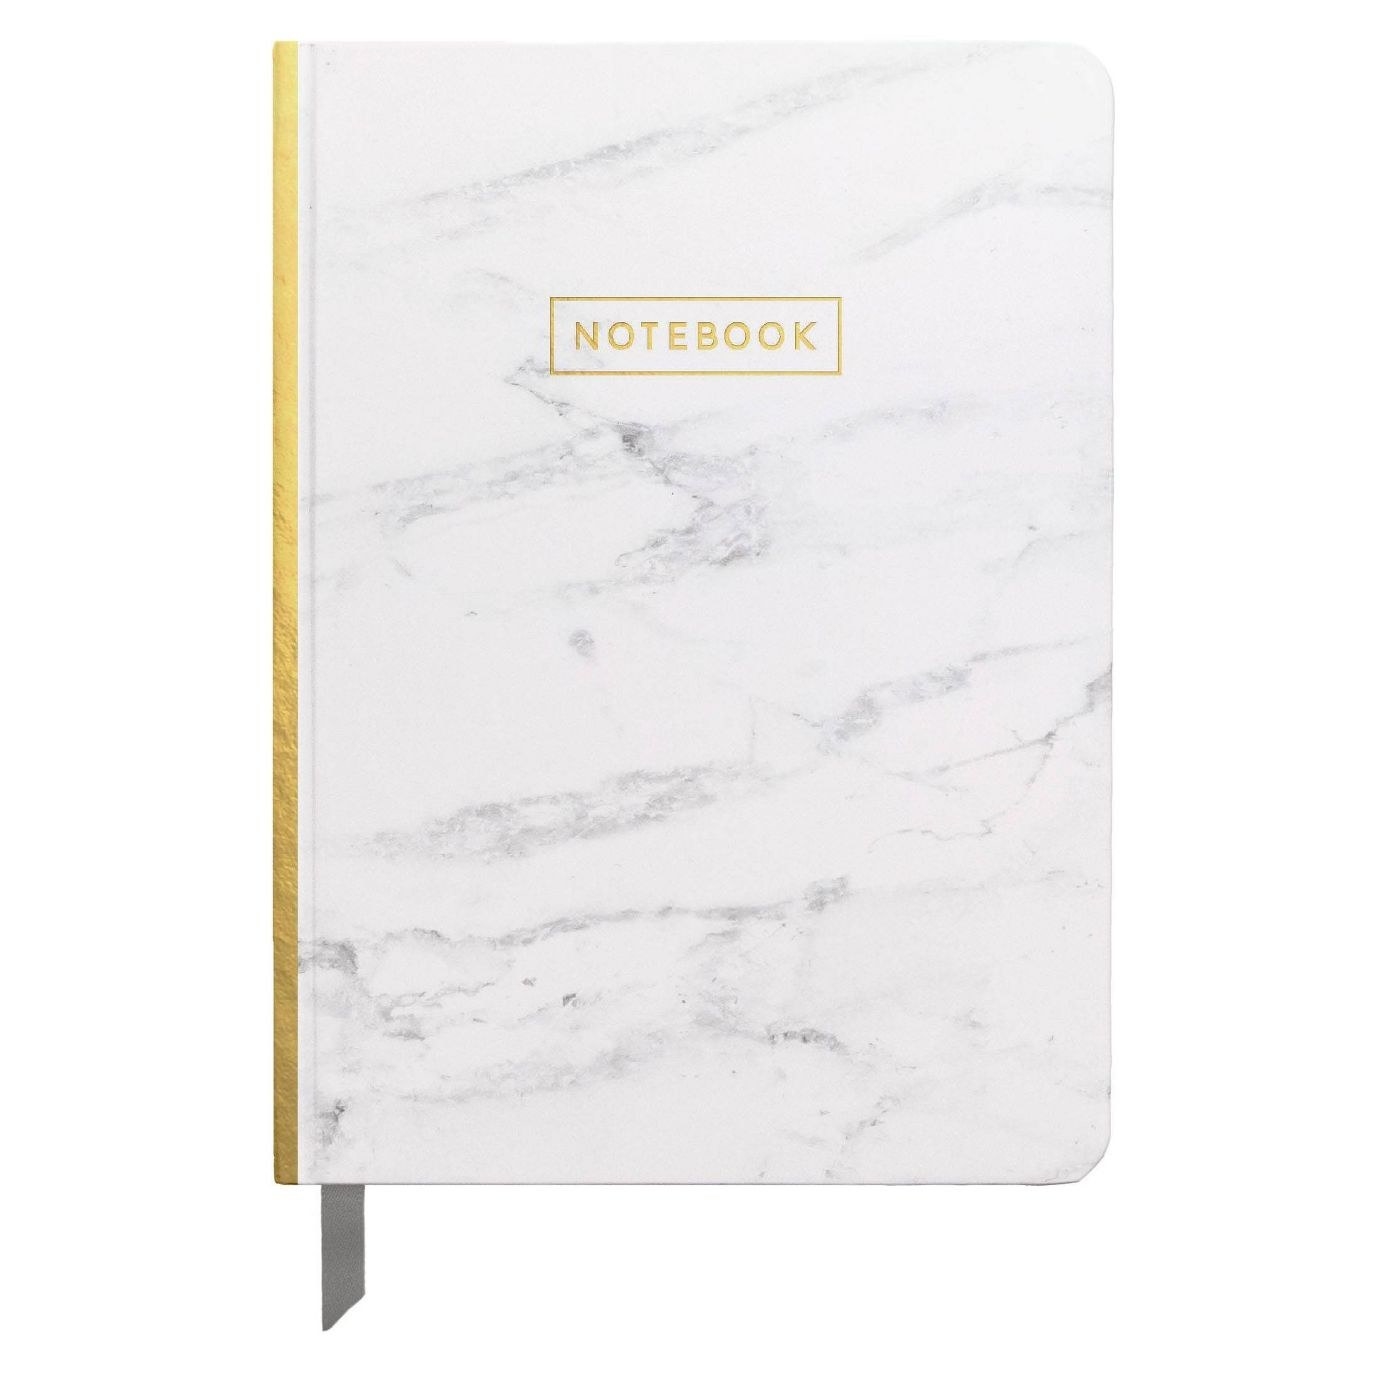 A notebook with a white marble print and gold lettering and binding